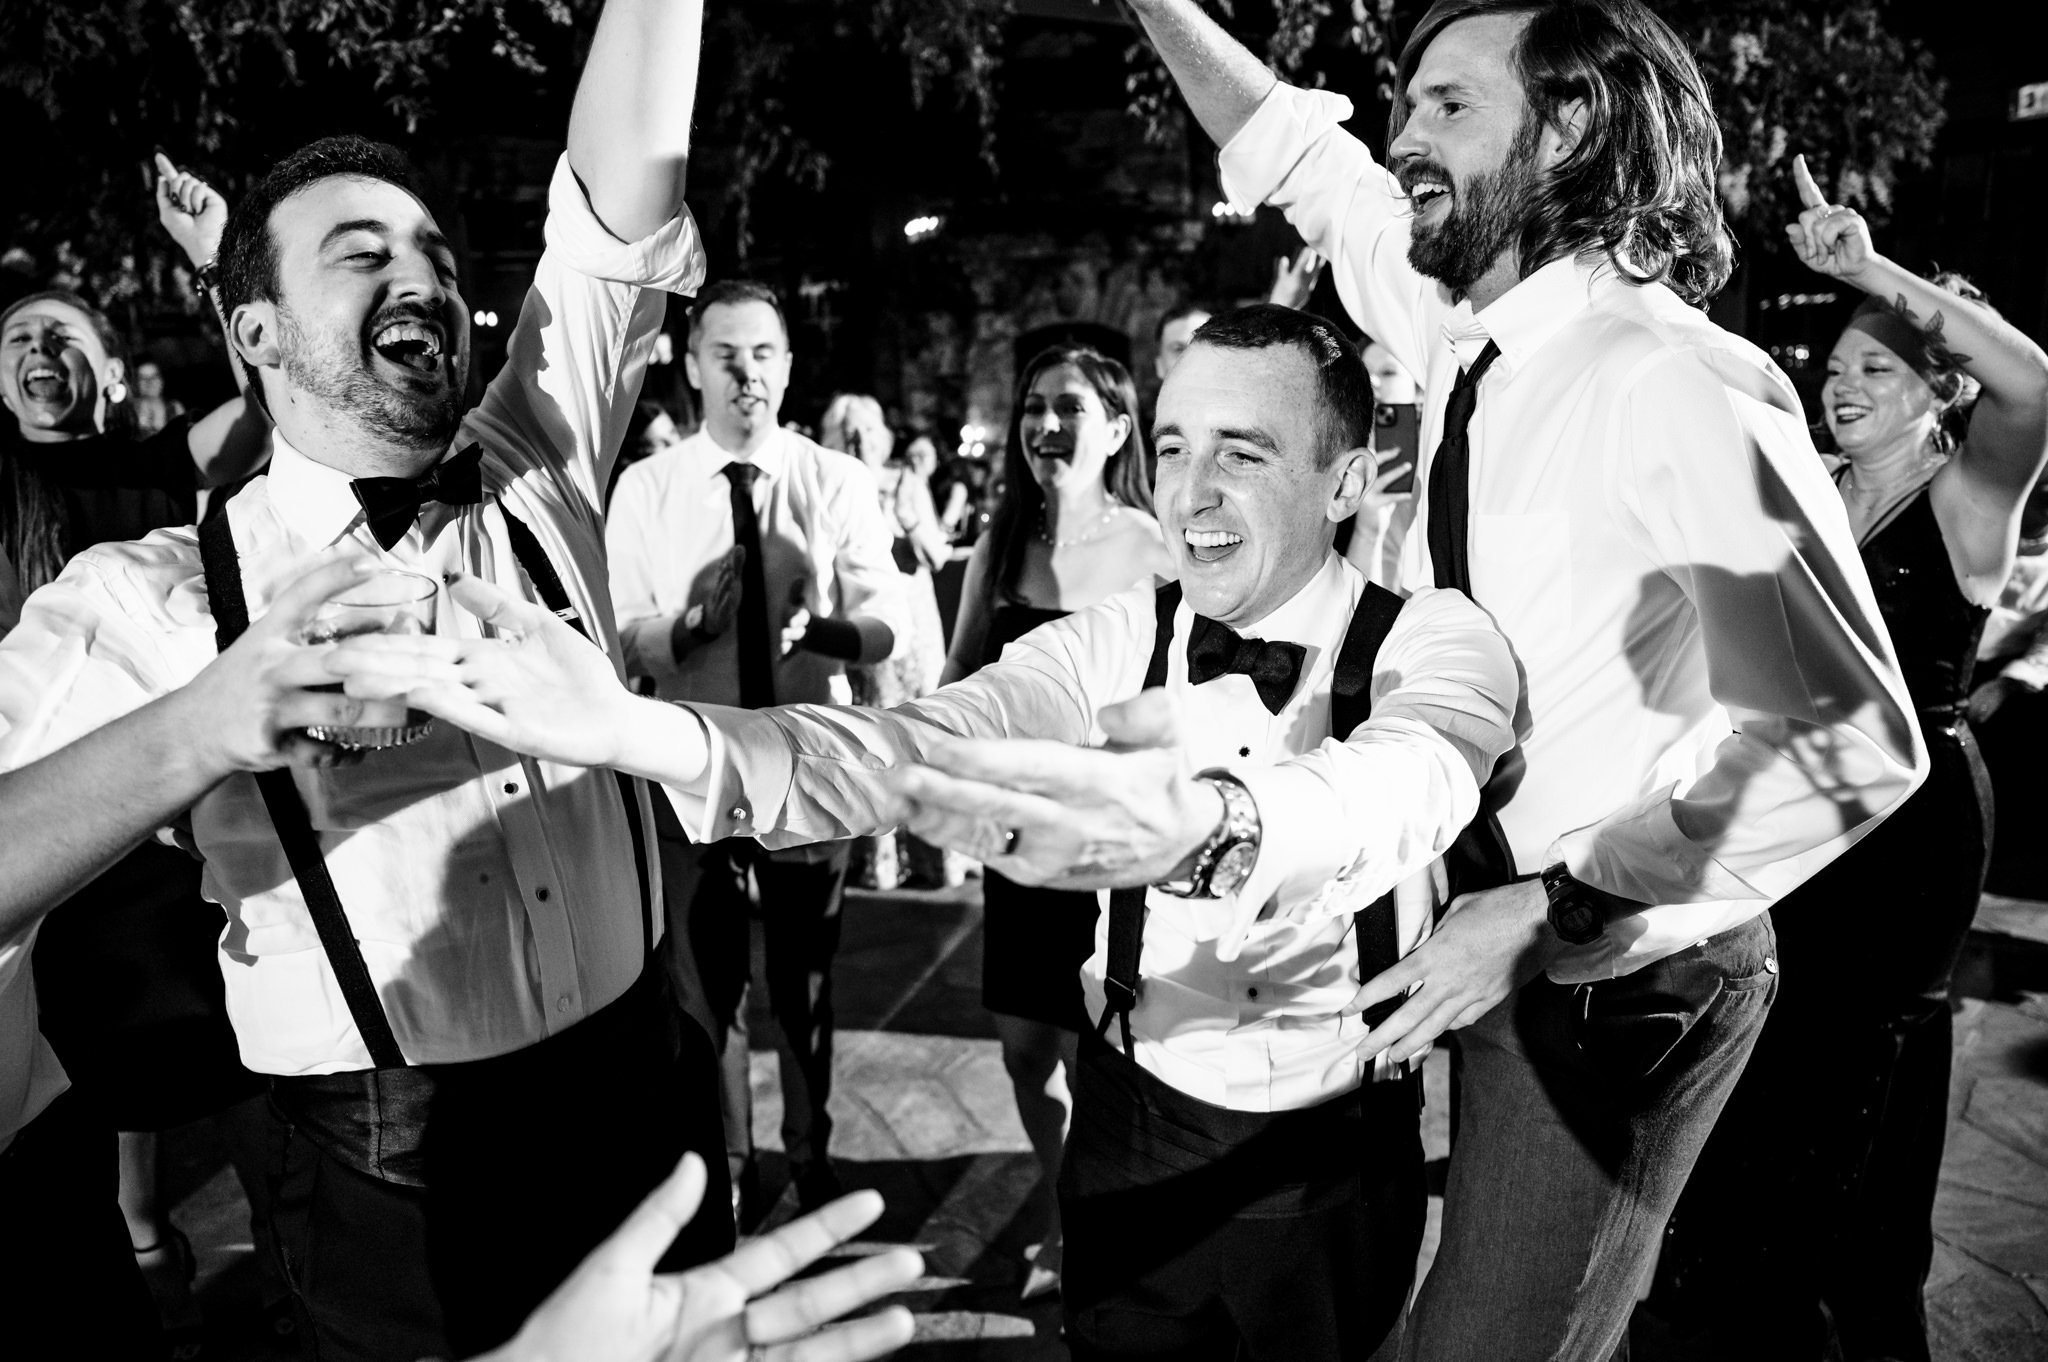 A black and white photo of men dancing at a wedding.